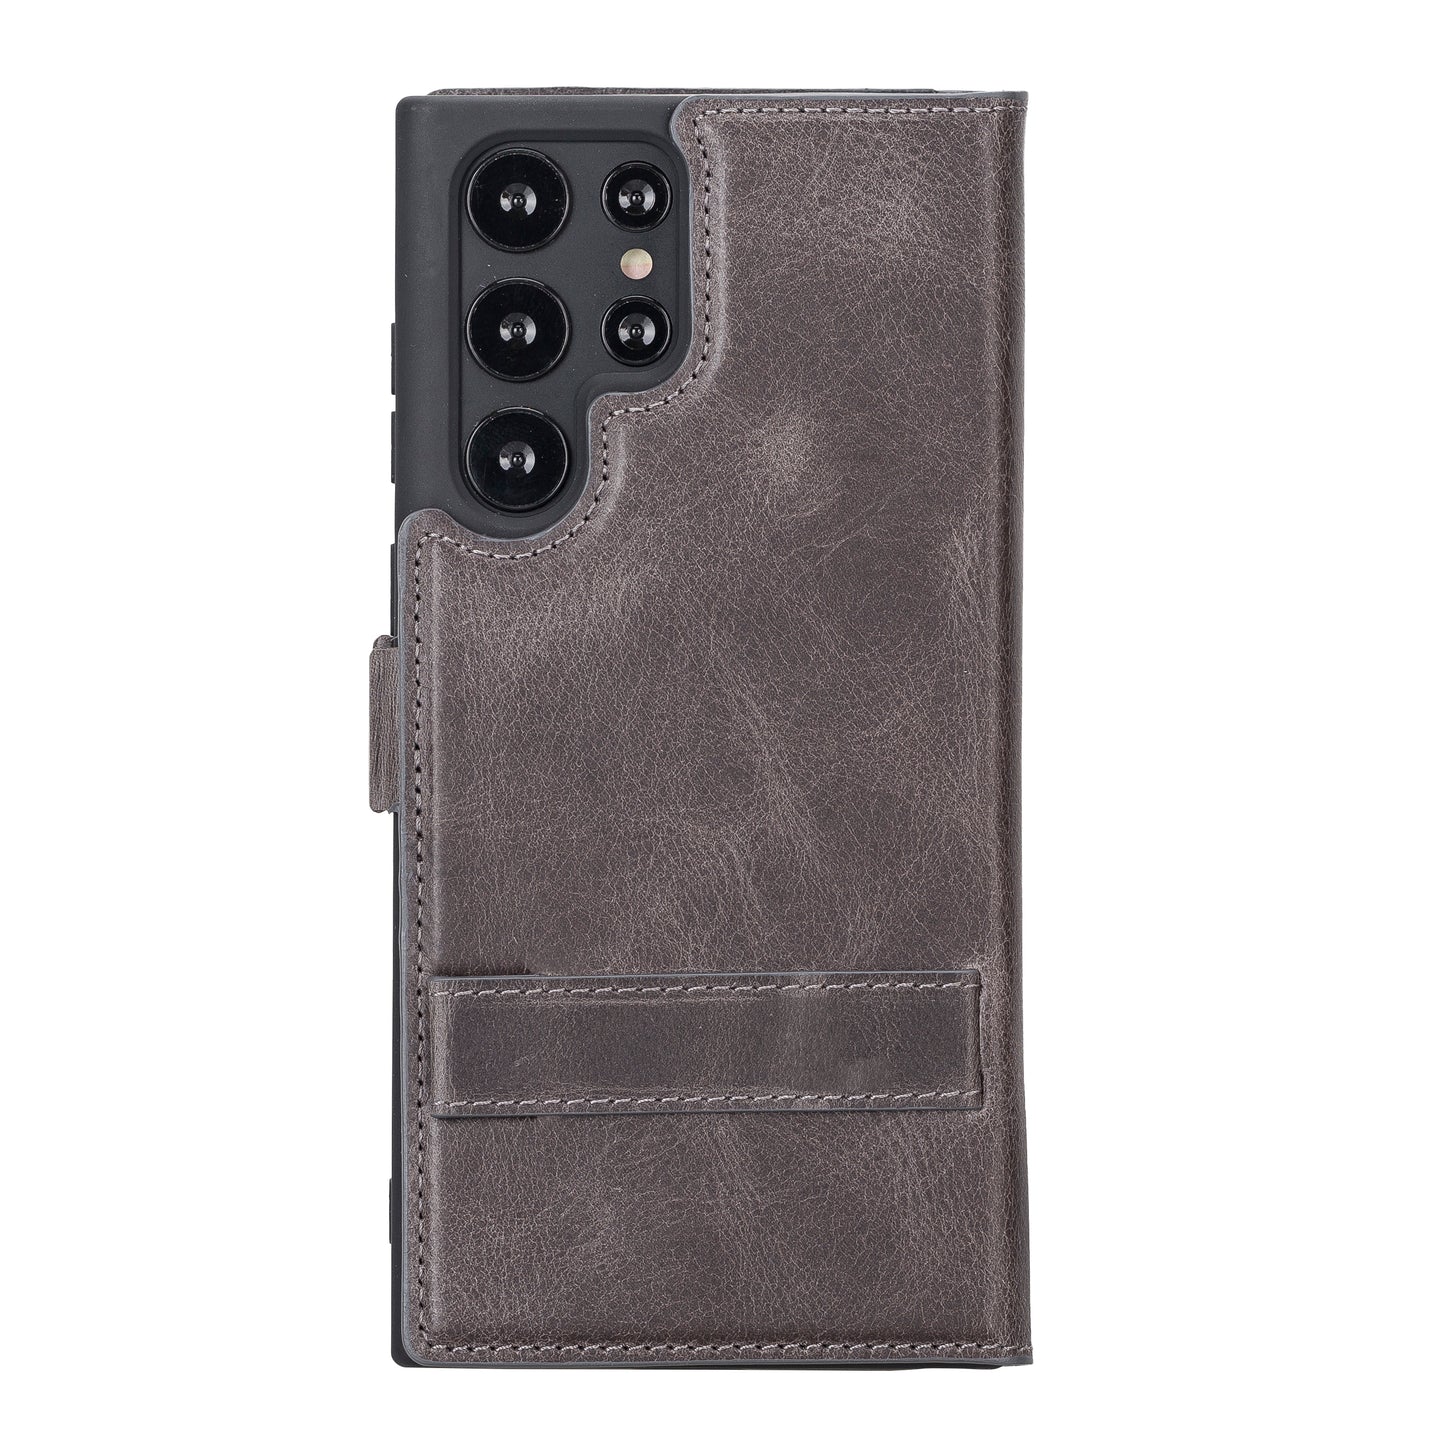 Samsung Galaxy S22 Ultra (6.8") Leather Wallet Case - Rustic Black